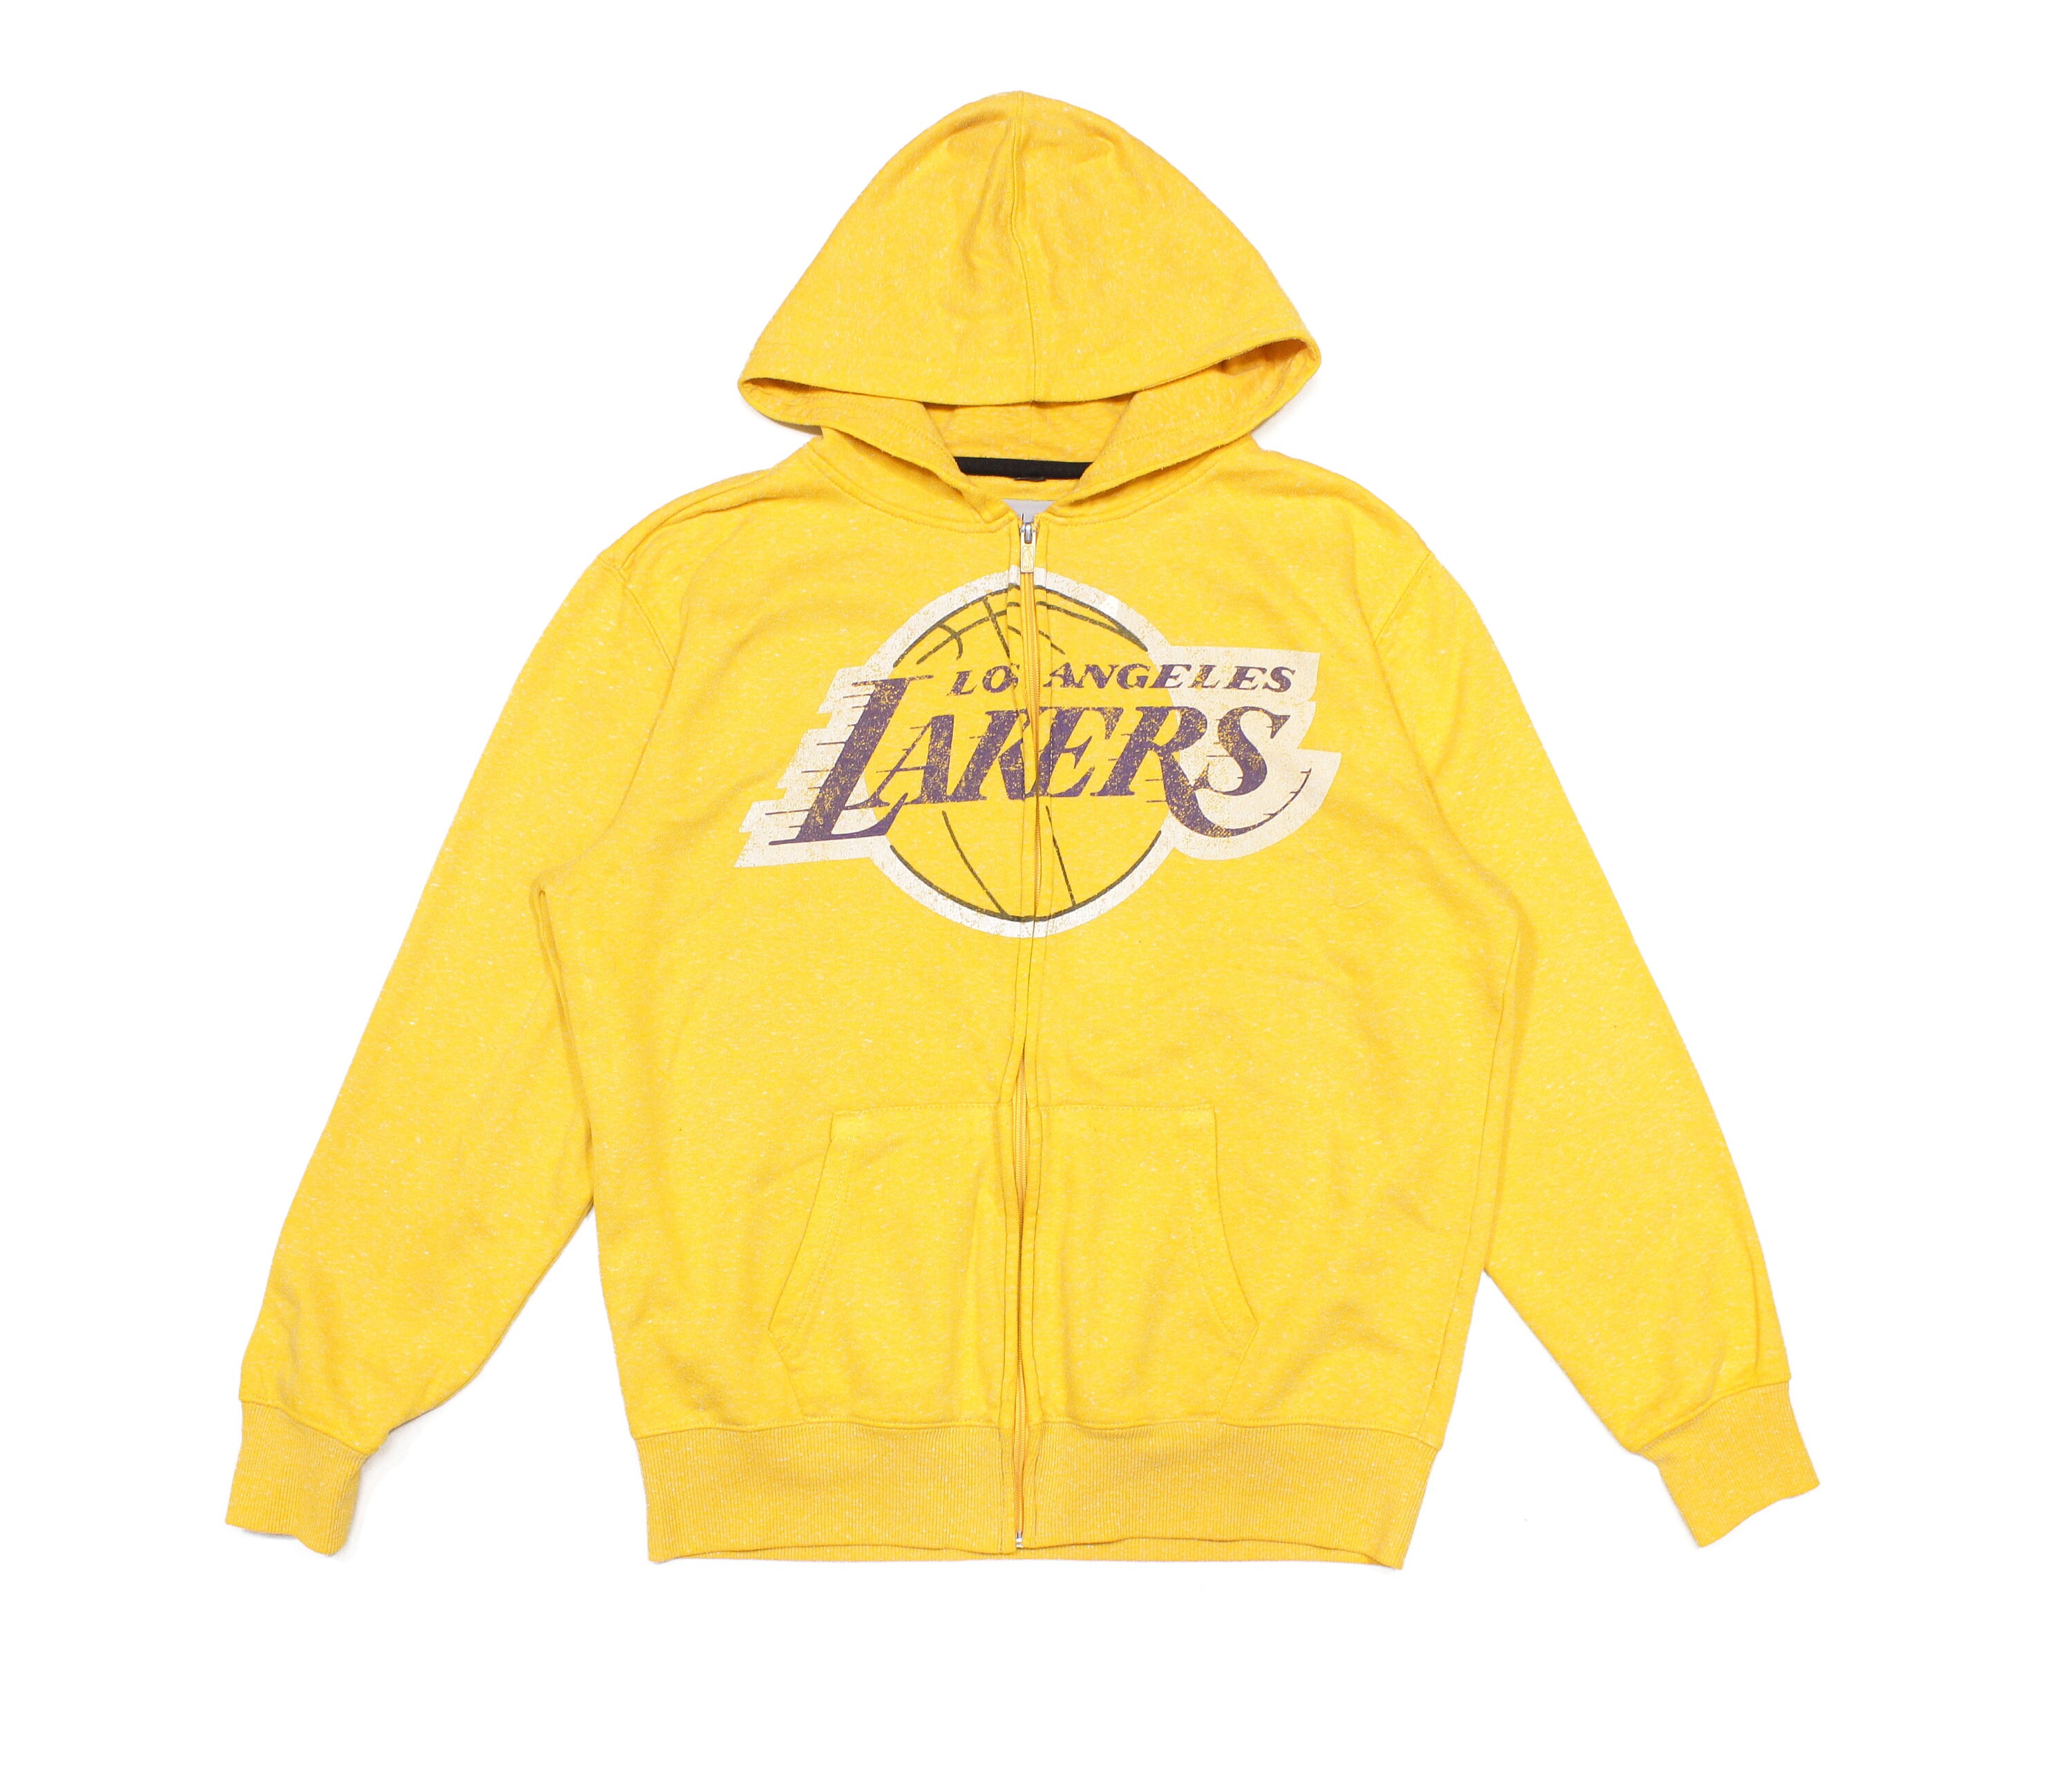 Lakers Longsleeve Hoodie Adidas Size M for Sale in Chino, CA